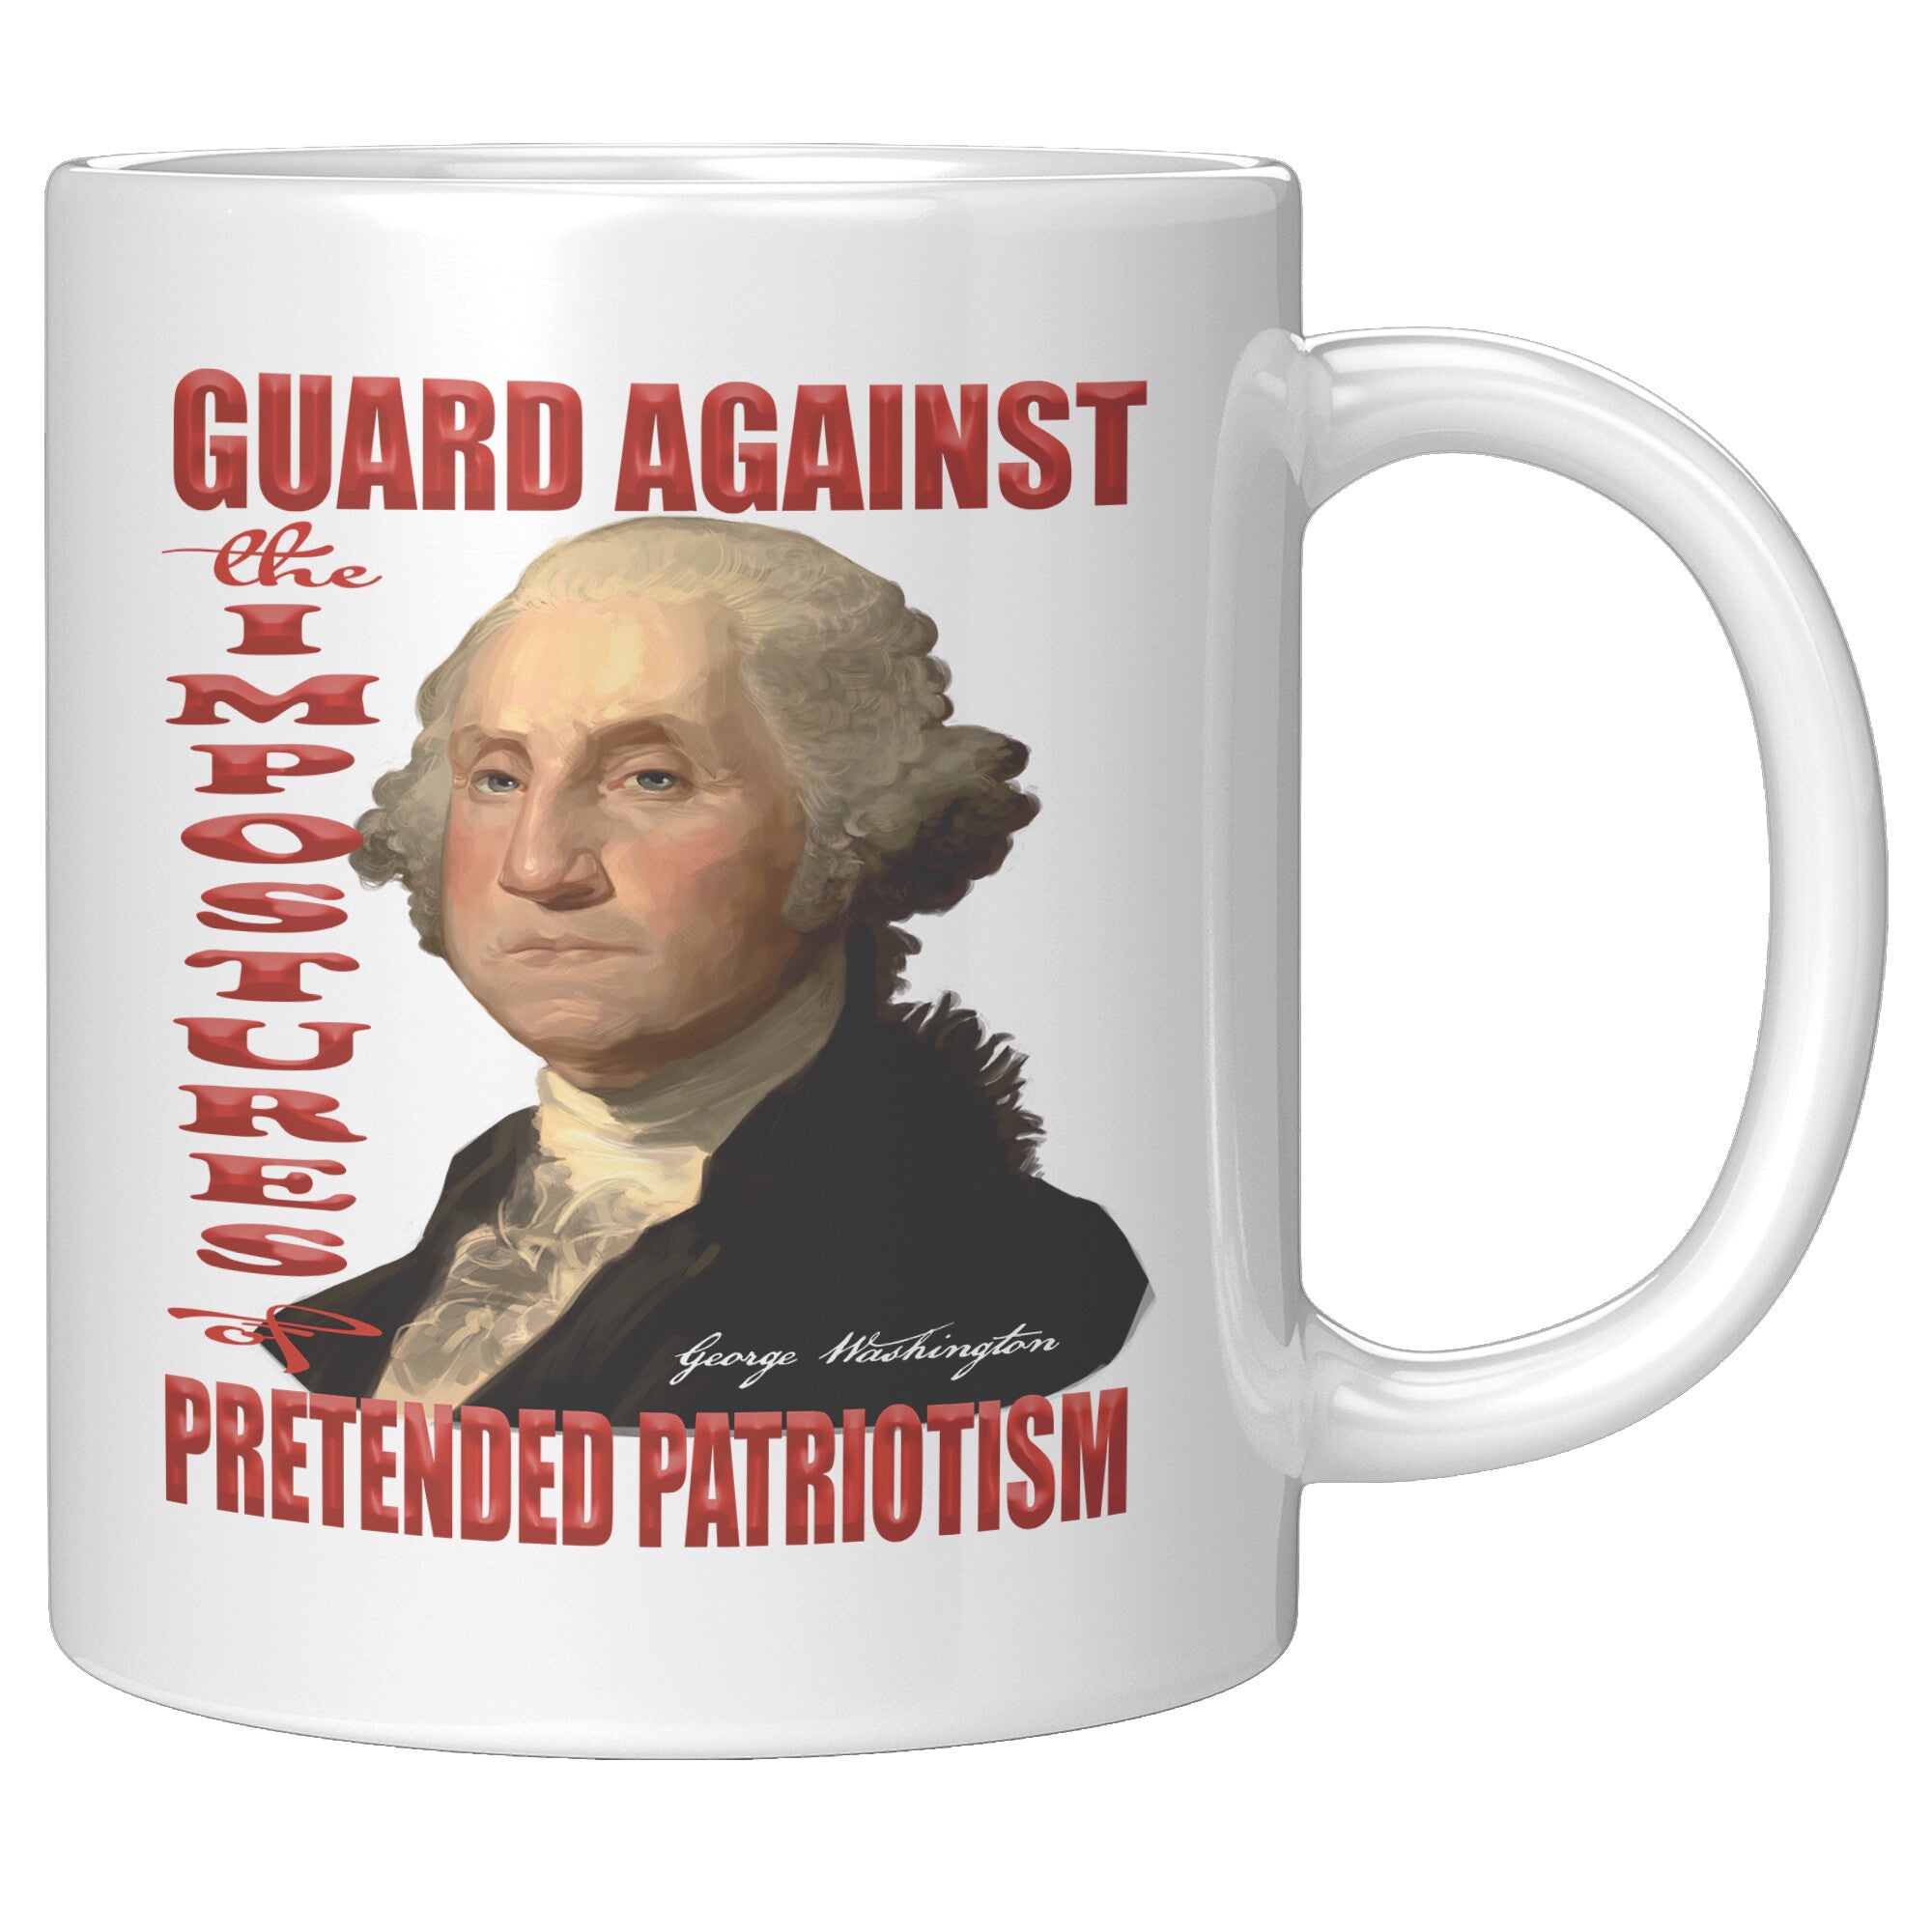 GEORGE WASHINGTON  -"GUARD AGAINST IMPOSTERS OF PRETENDED PATRIOTISM"